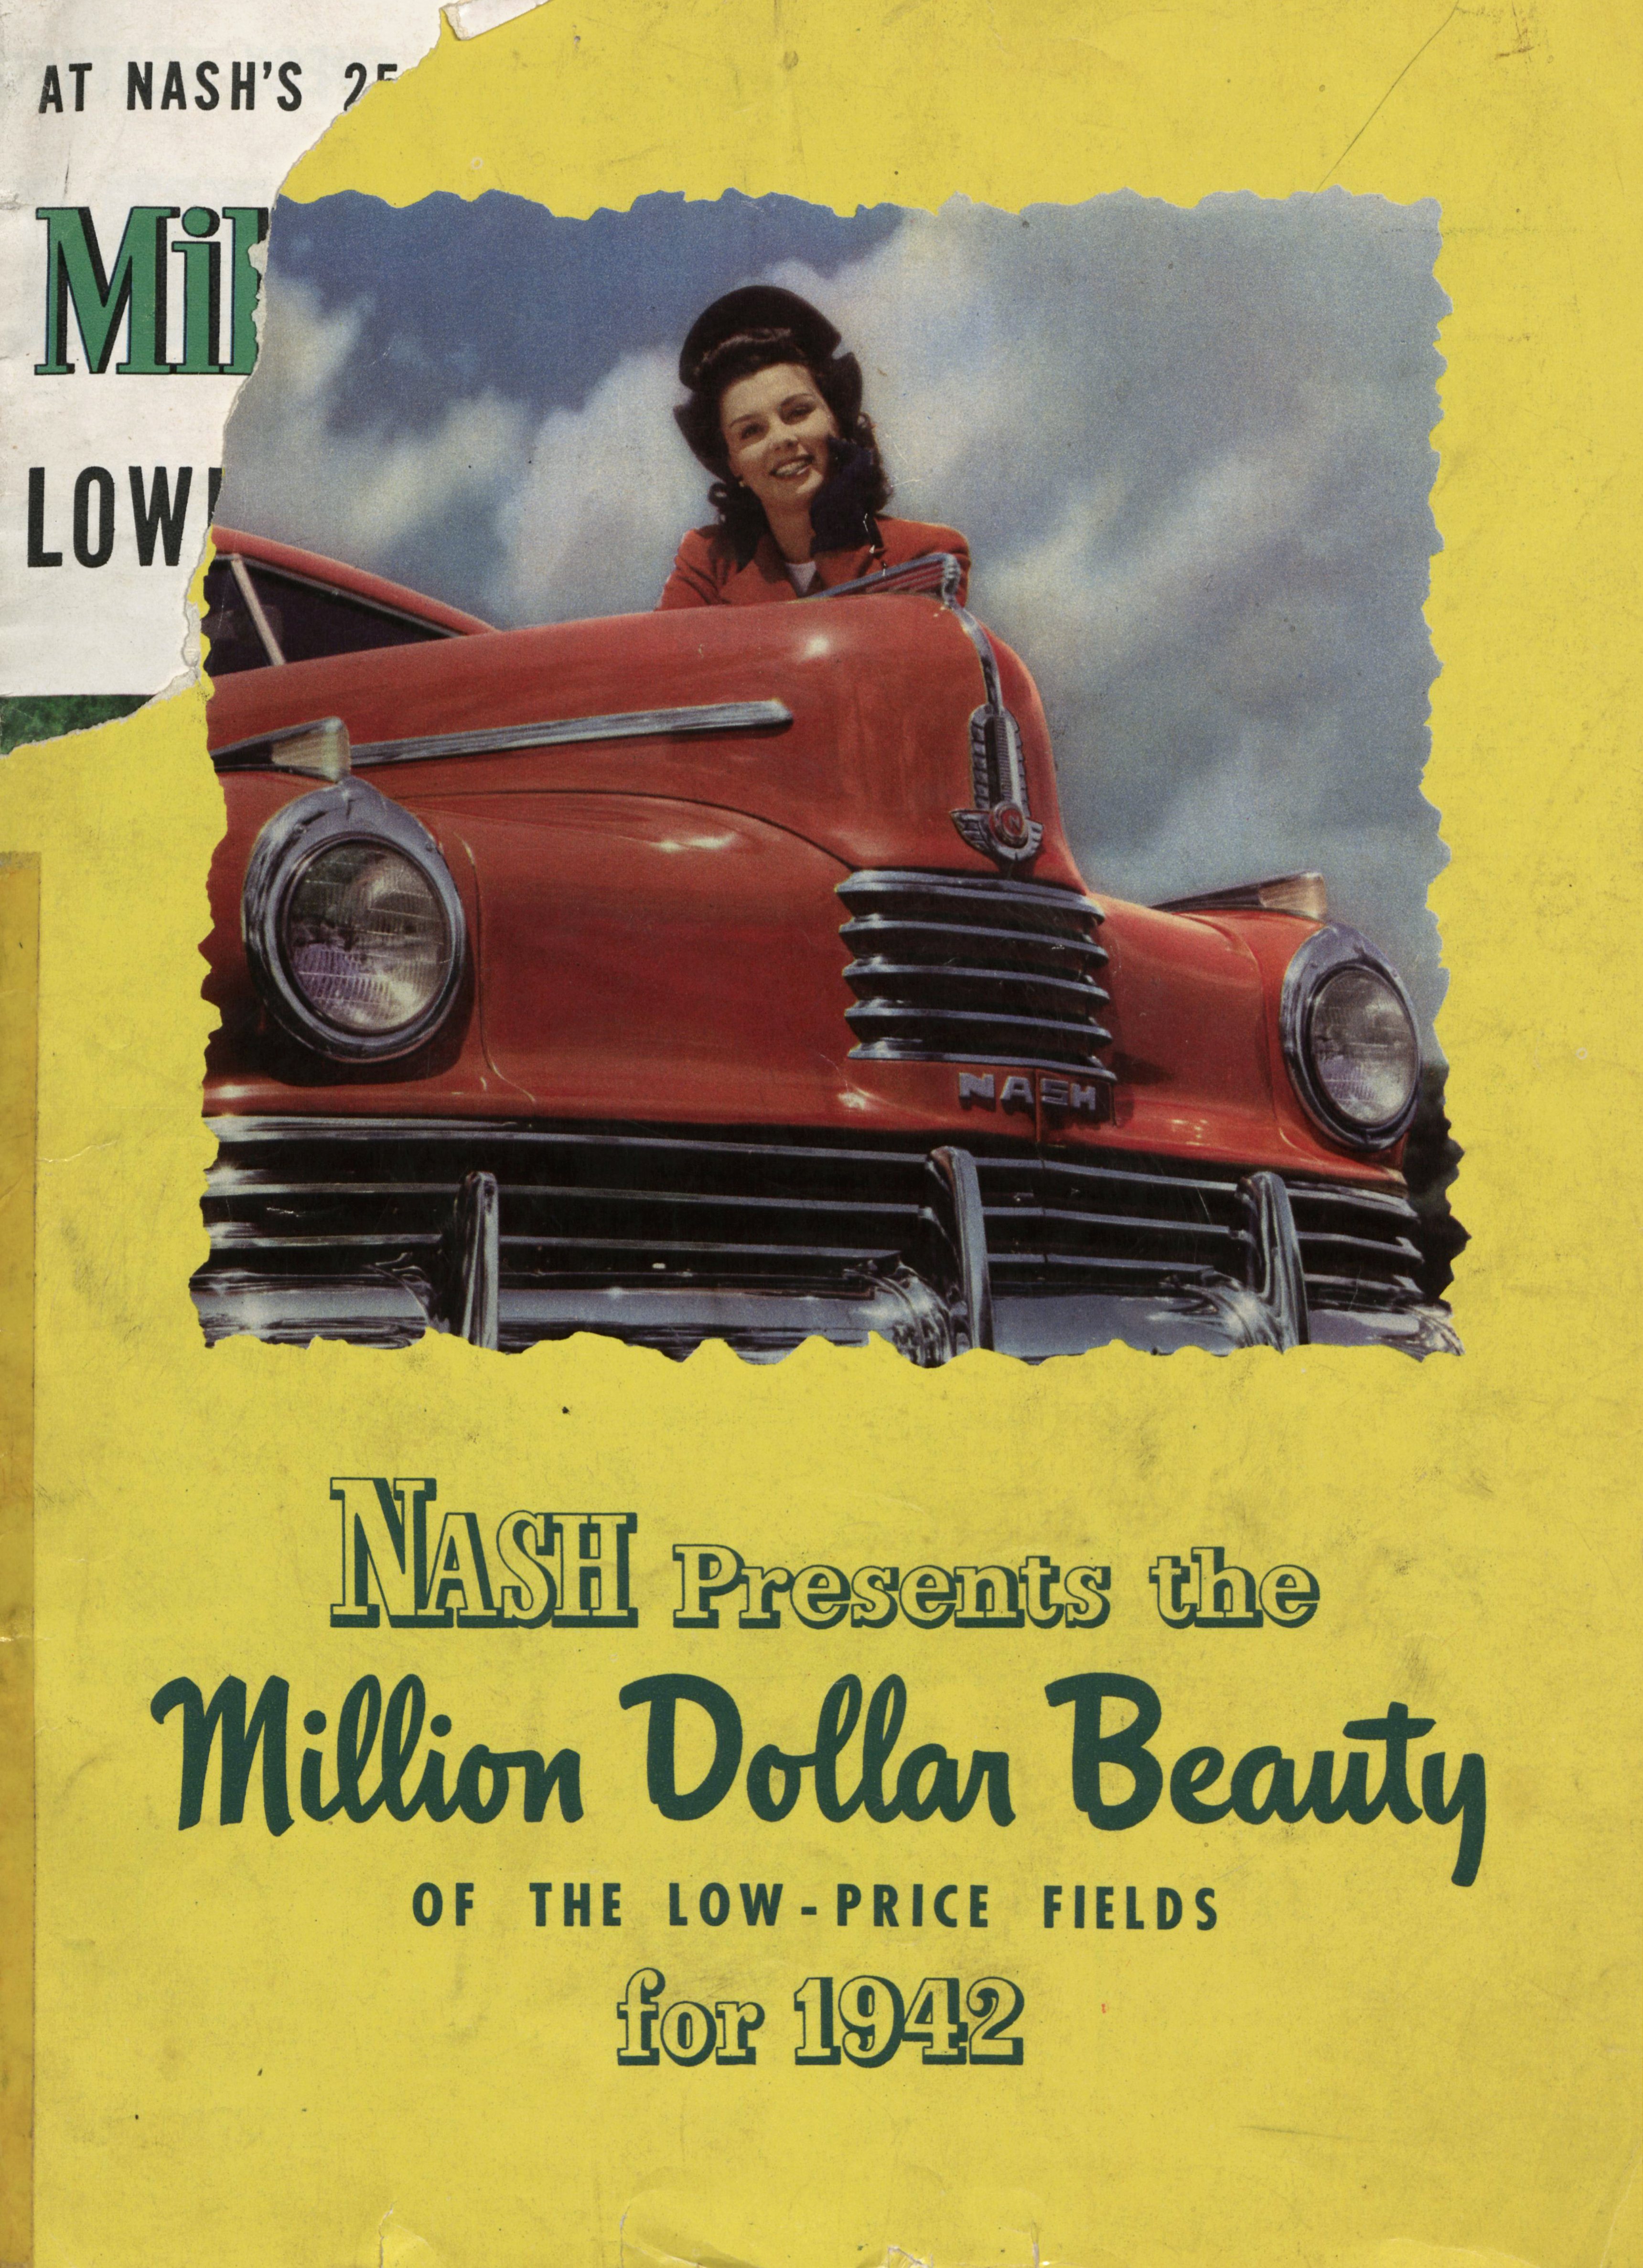 Catalog advertising Nash Automobile's 1942 "Million Dollar Beauty" with a photograph of a woman and the front of the car.